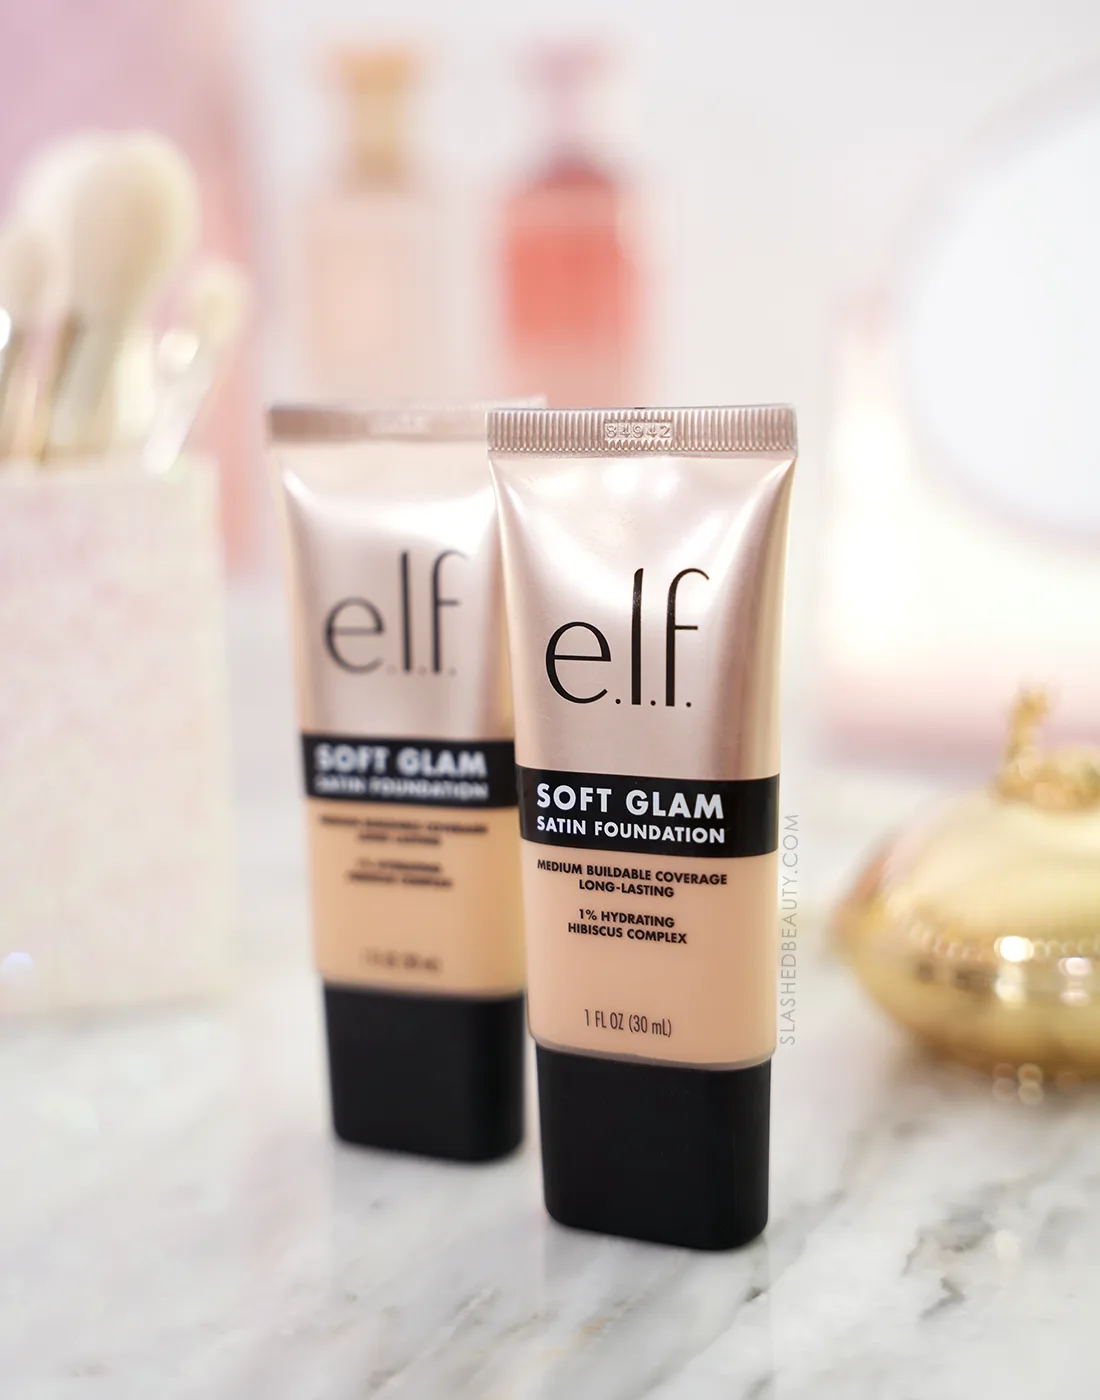 Two tubes of e.l.f. Soft Glam Satin Foundation standing side by side on a vanity | e.l.f. Soft Glam Satin Foundation Review | Slashed Beauty